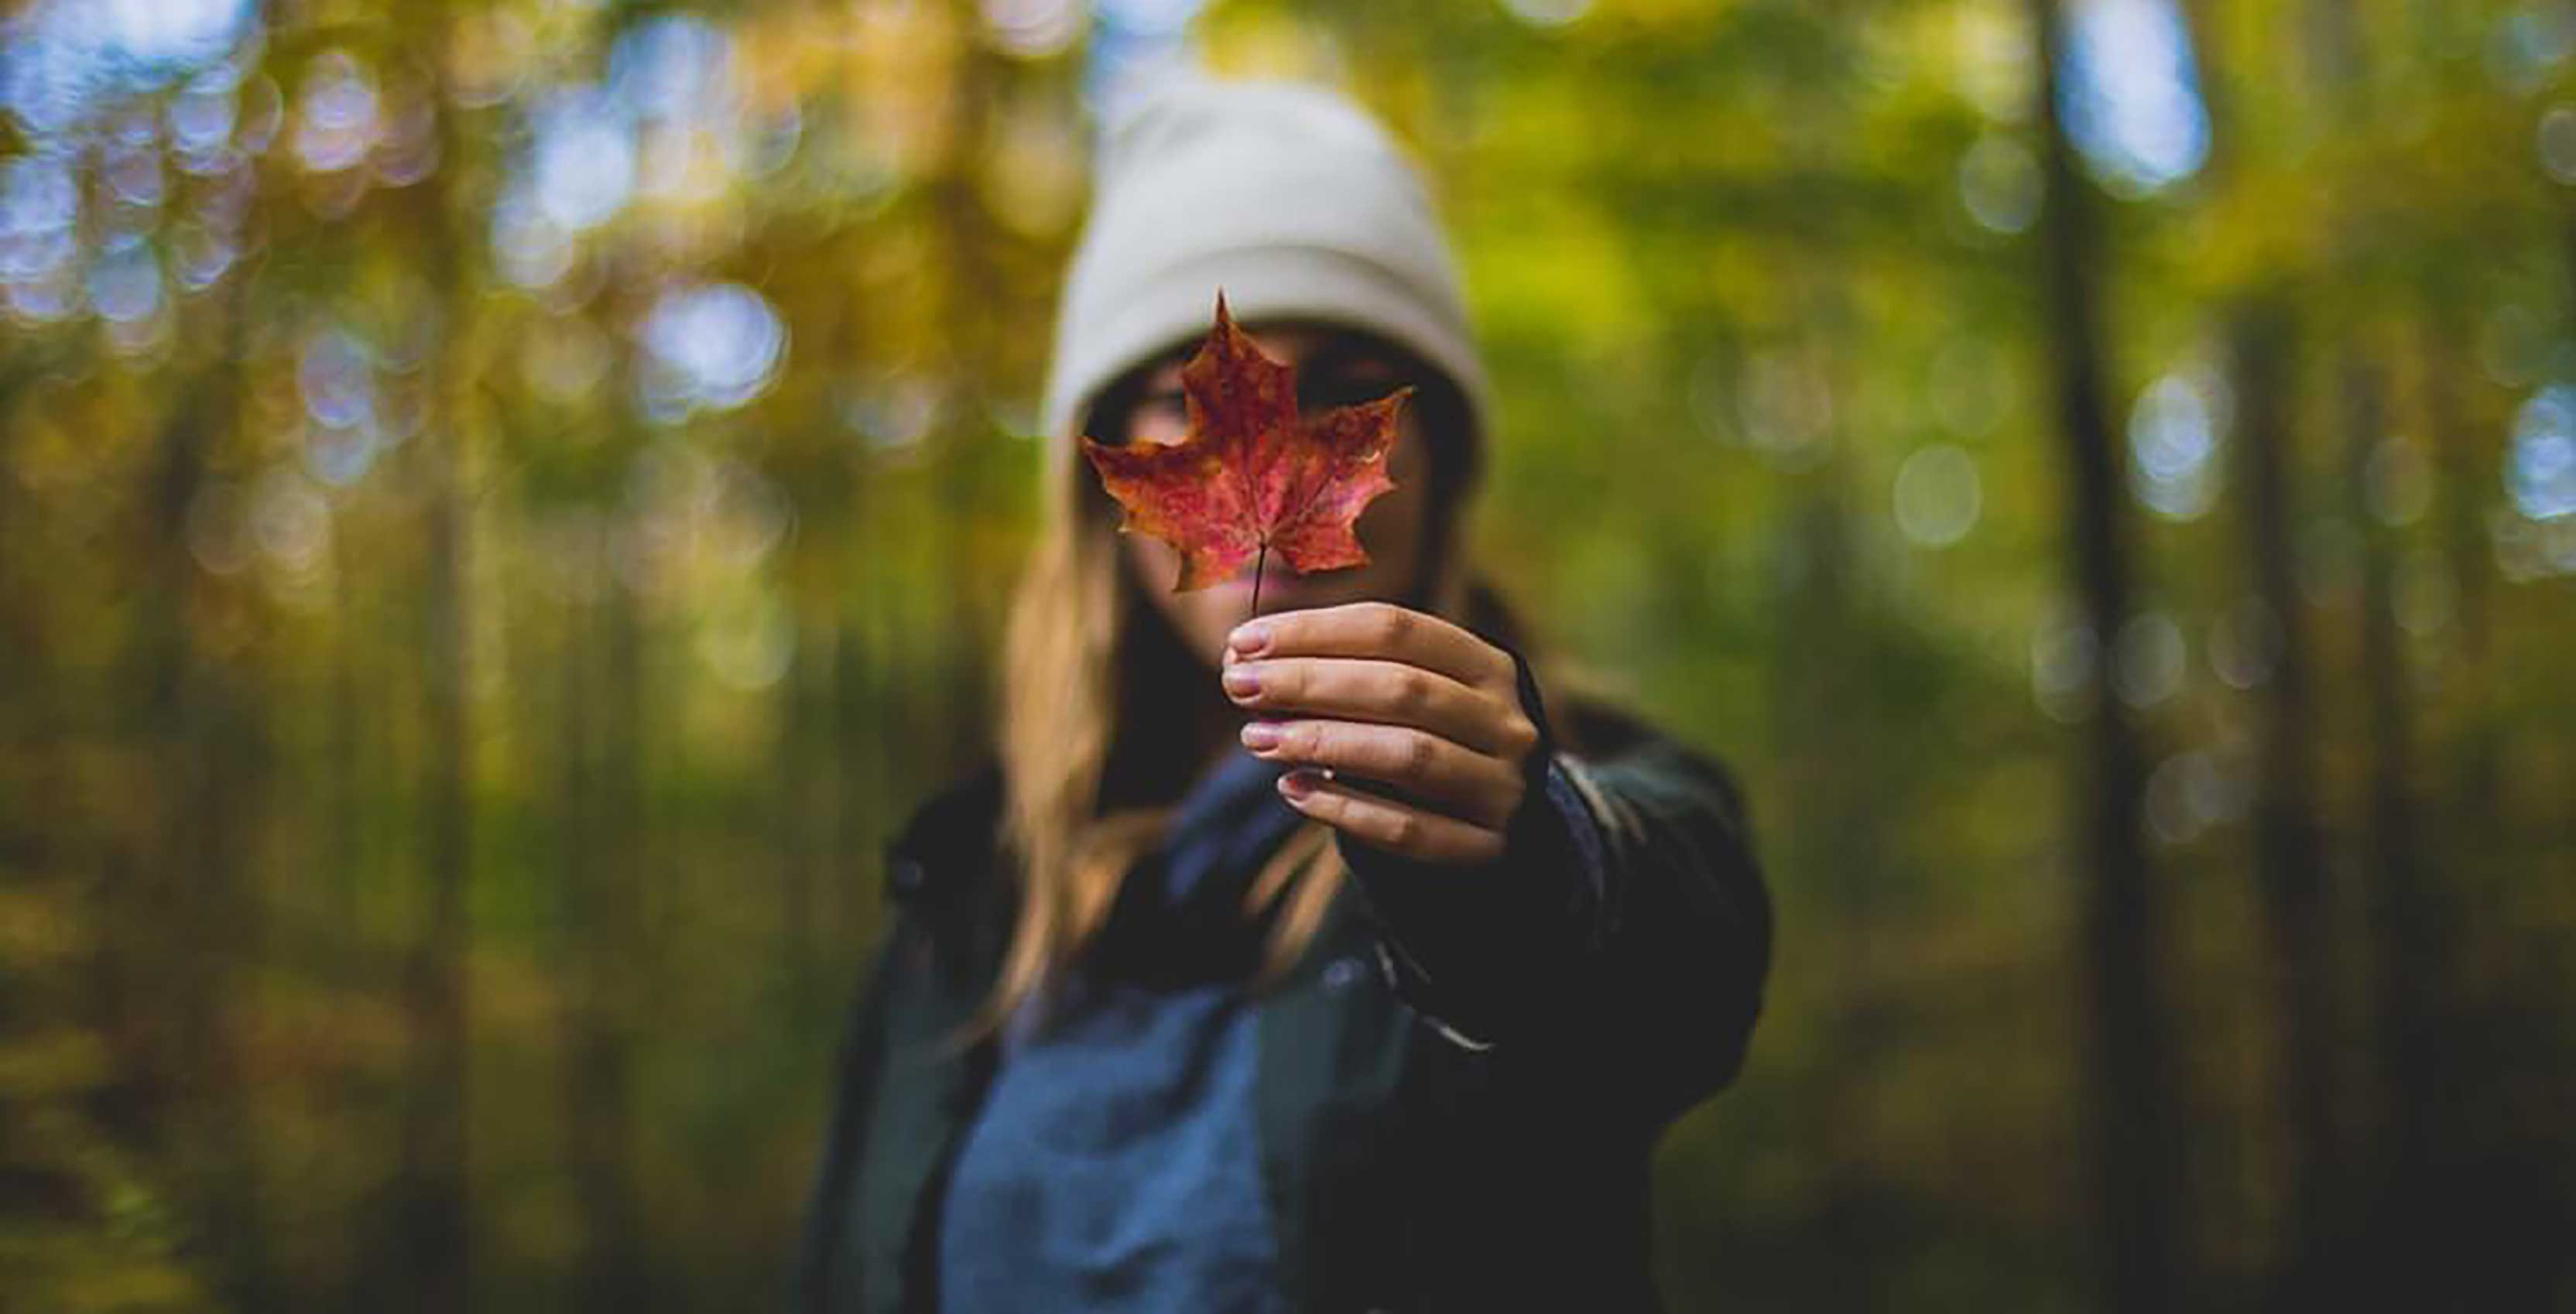 Maple leaf in hand